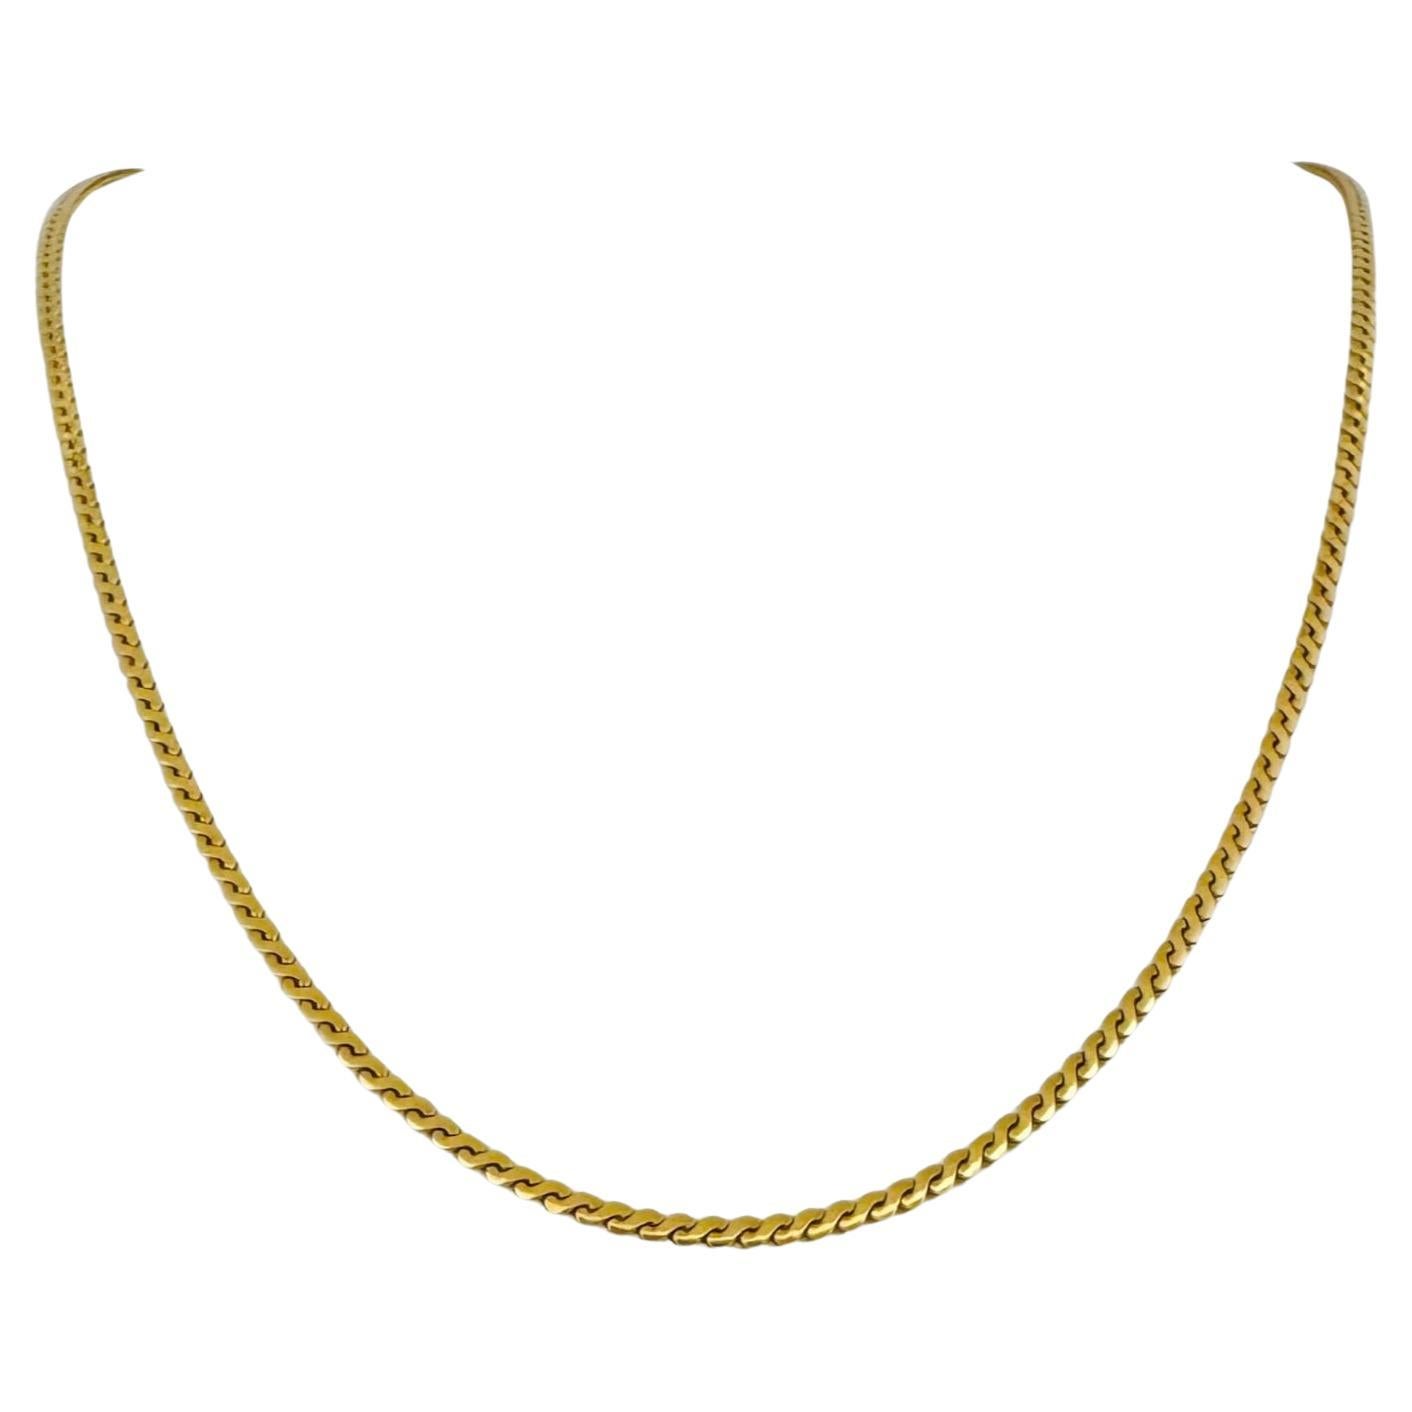 18 Karat Yellow Gold Solid Serpentine Link Chain Necklace Italy 